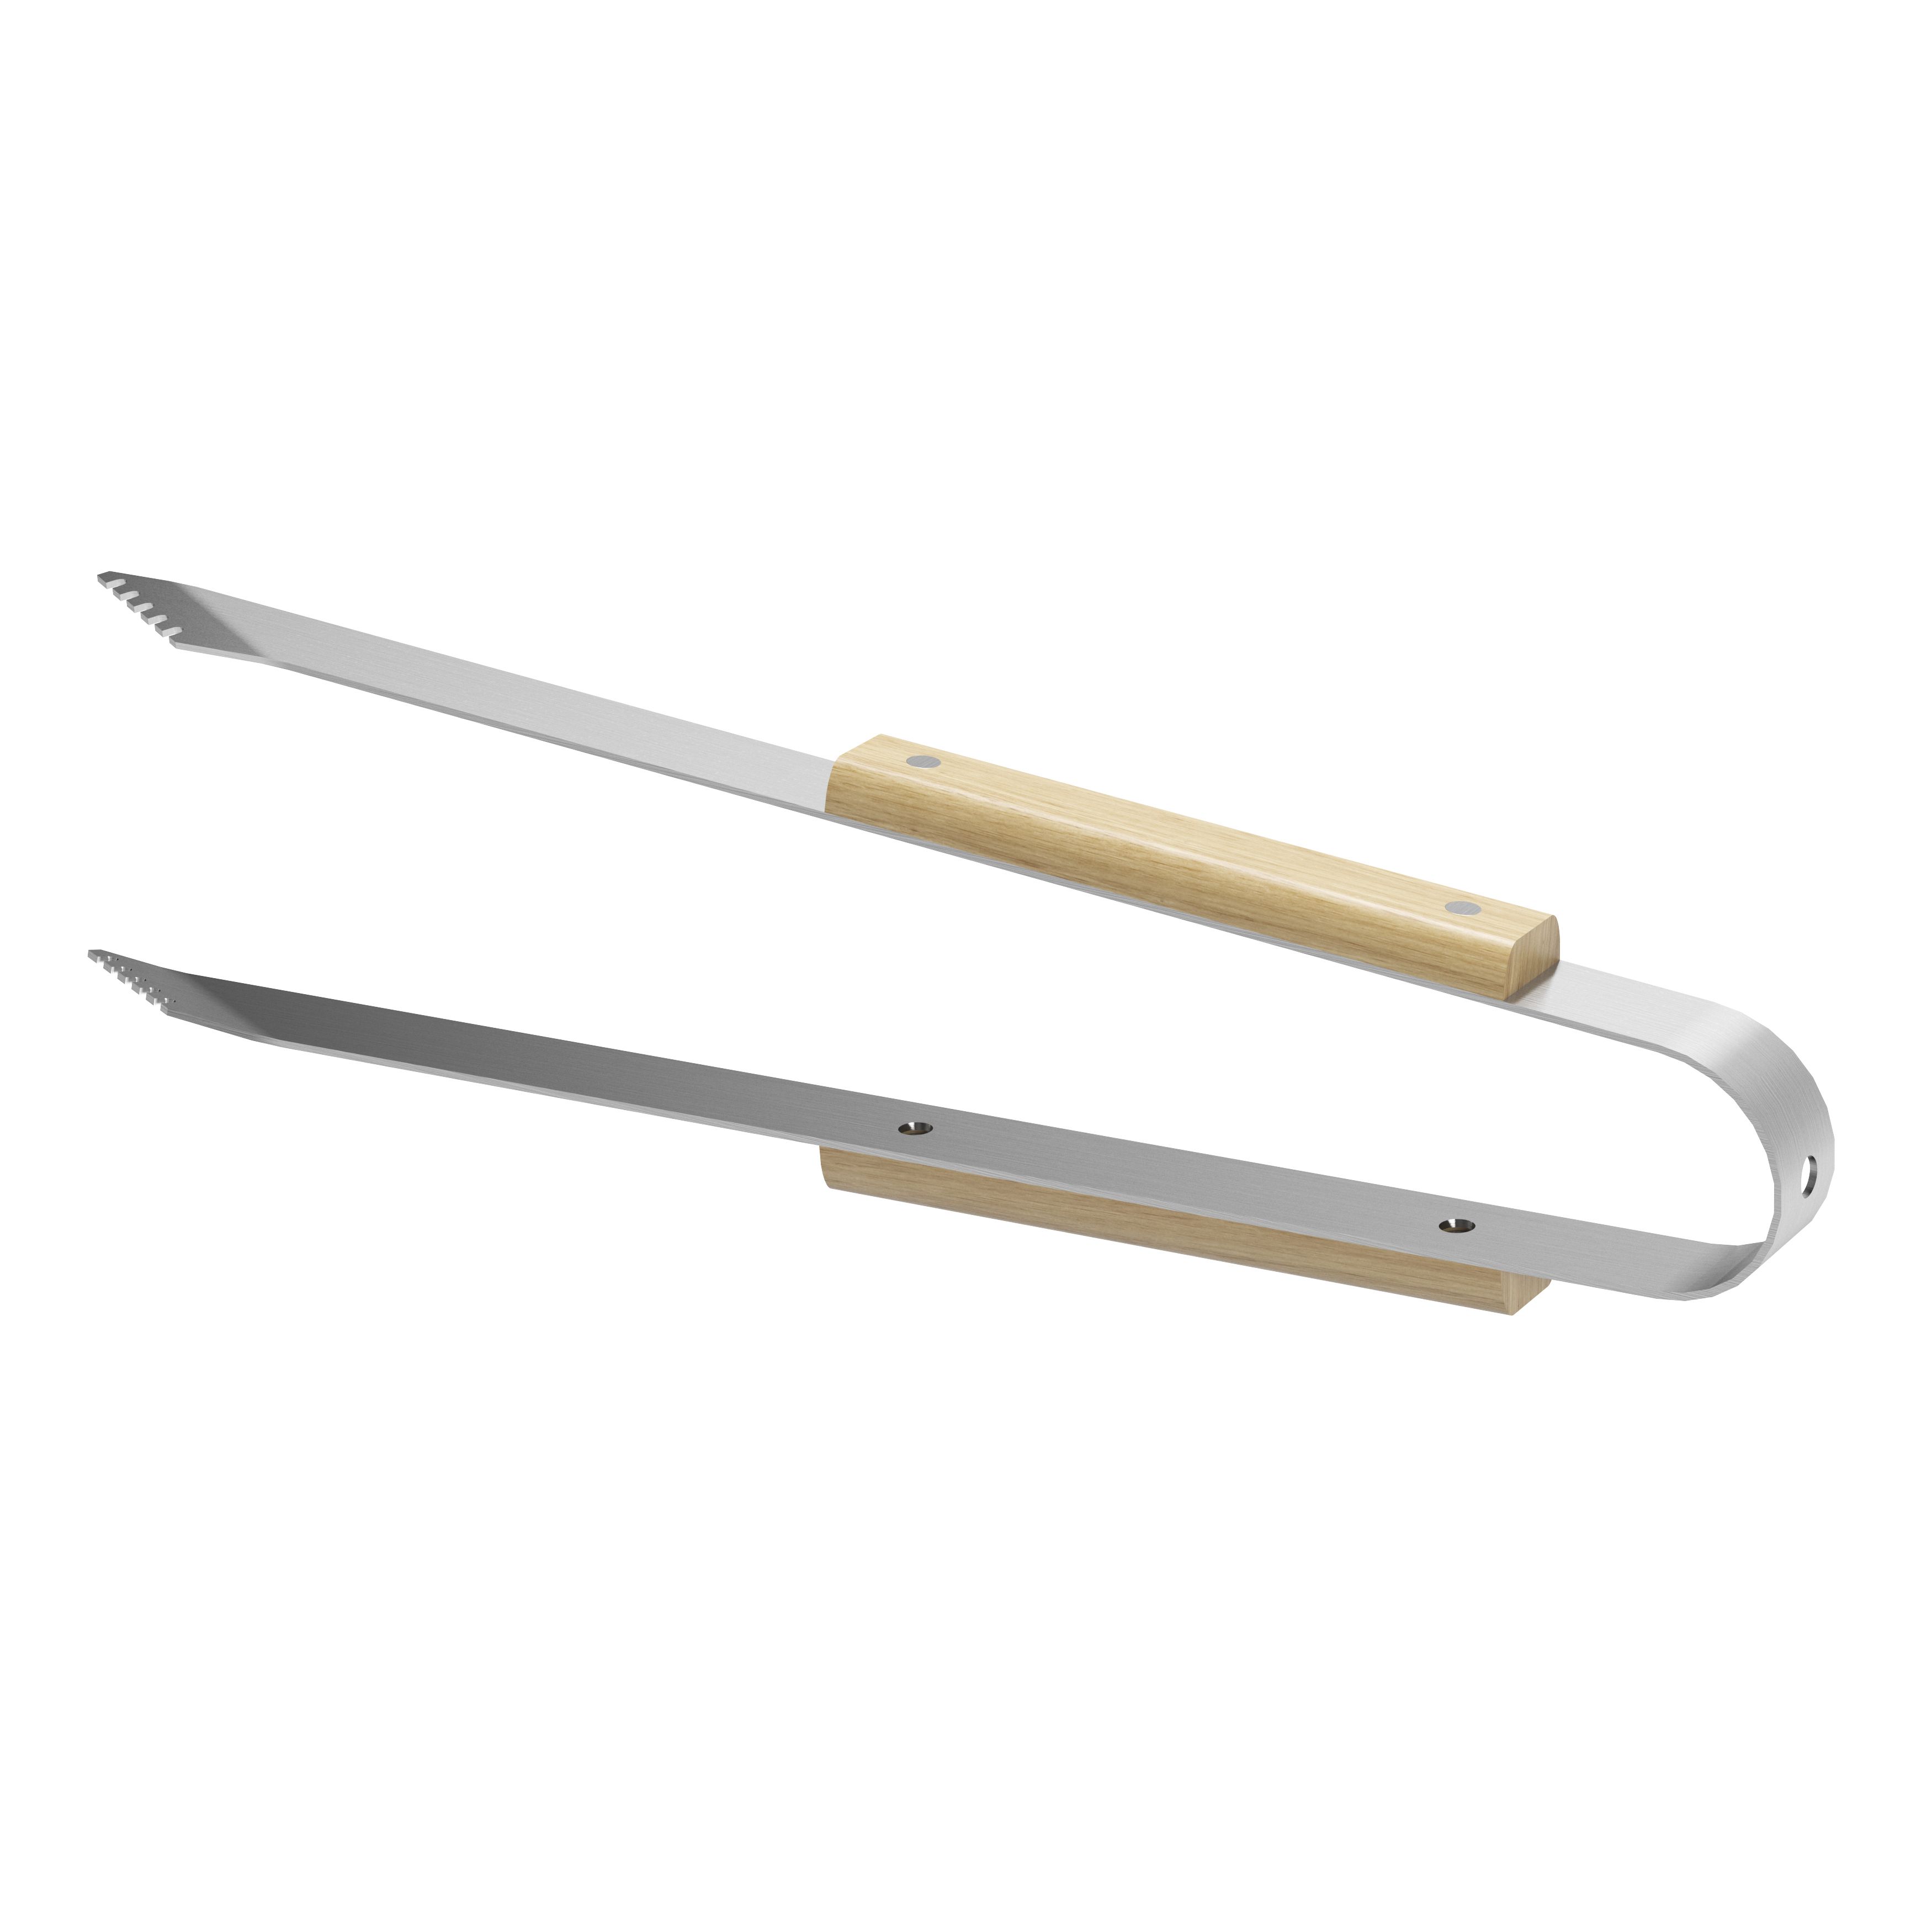 GoodHome Natural Beech & stainless steel Grill tongs